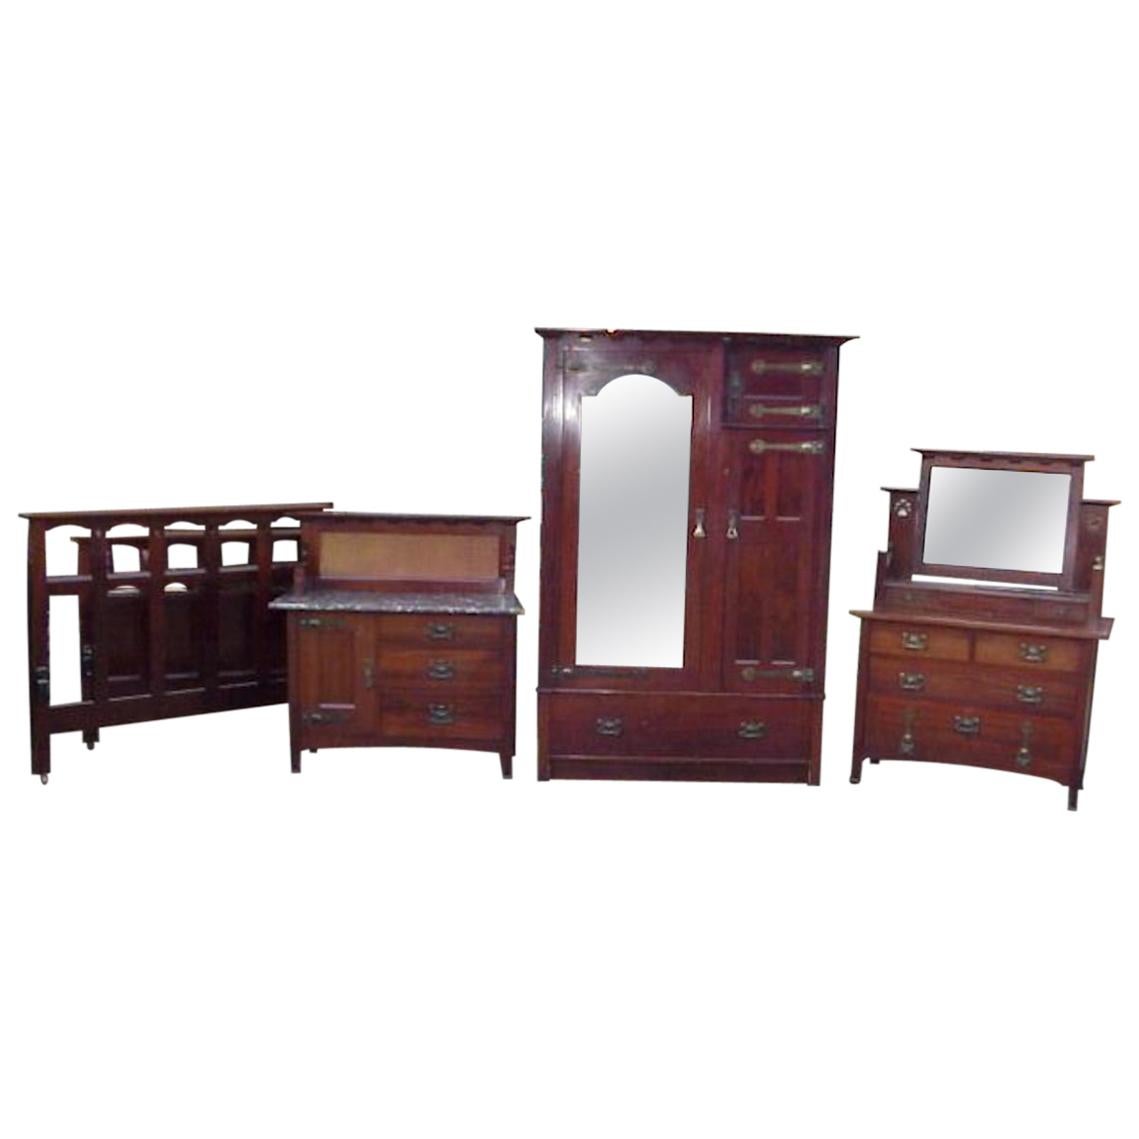 E A Taylor Attr Wylie & Lochhead Arts & Crafts Four-Piece Mahogany Bedroom Suite For Sale